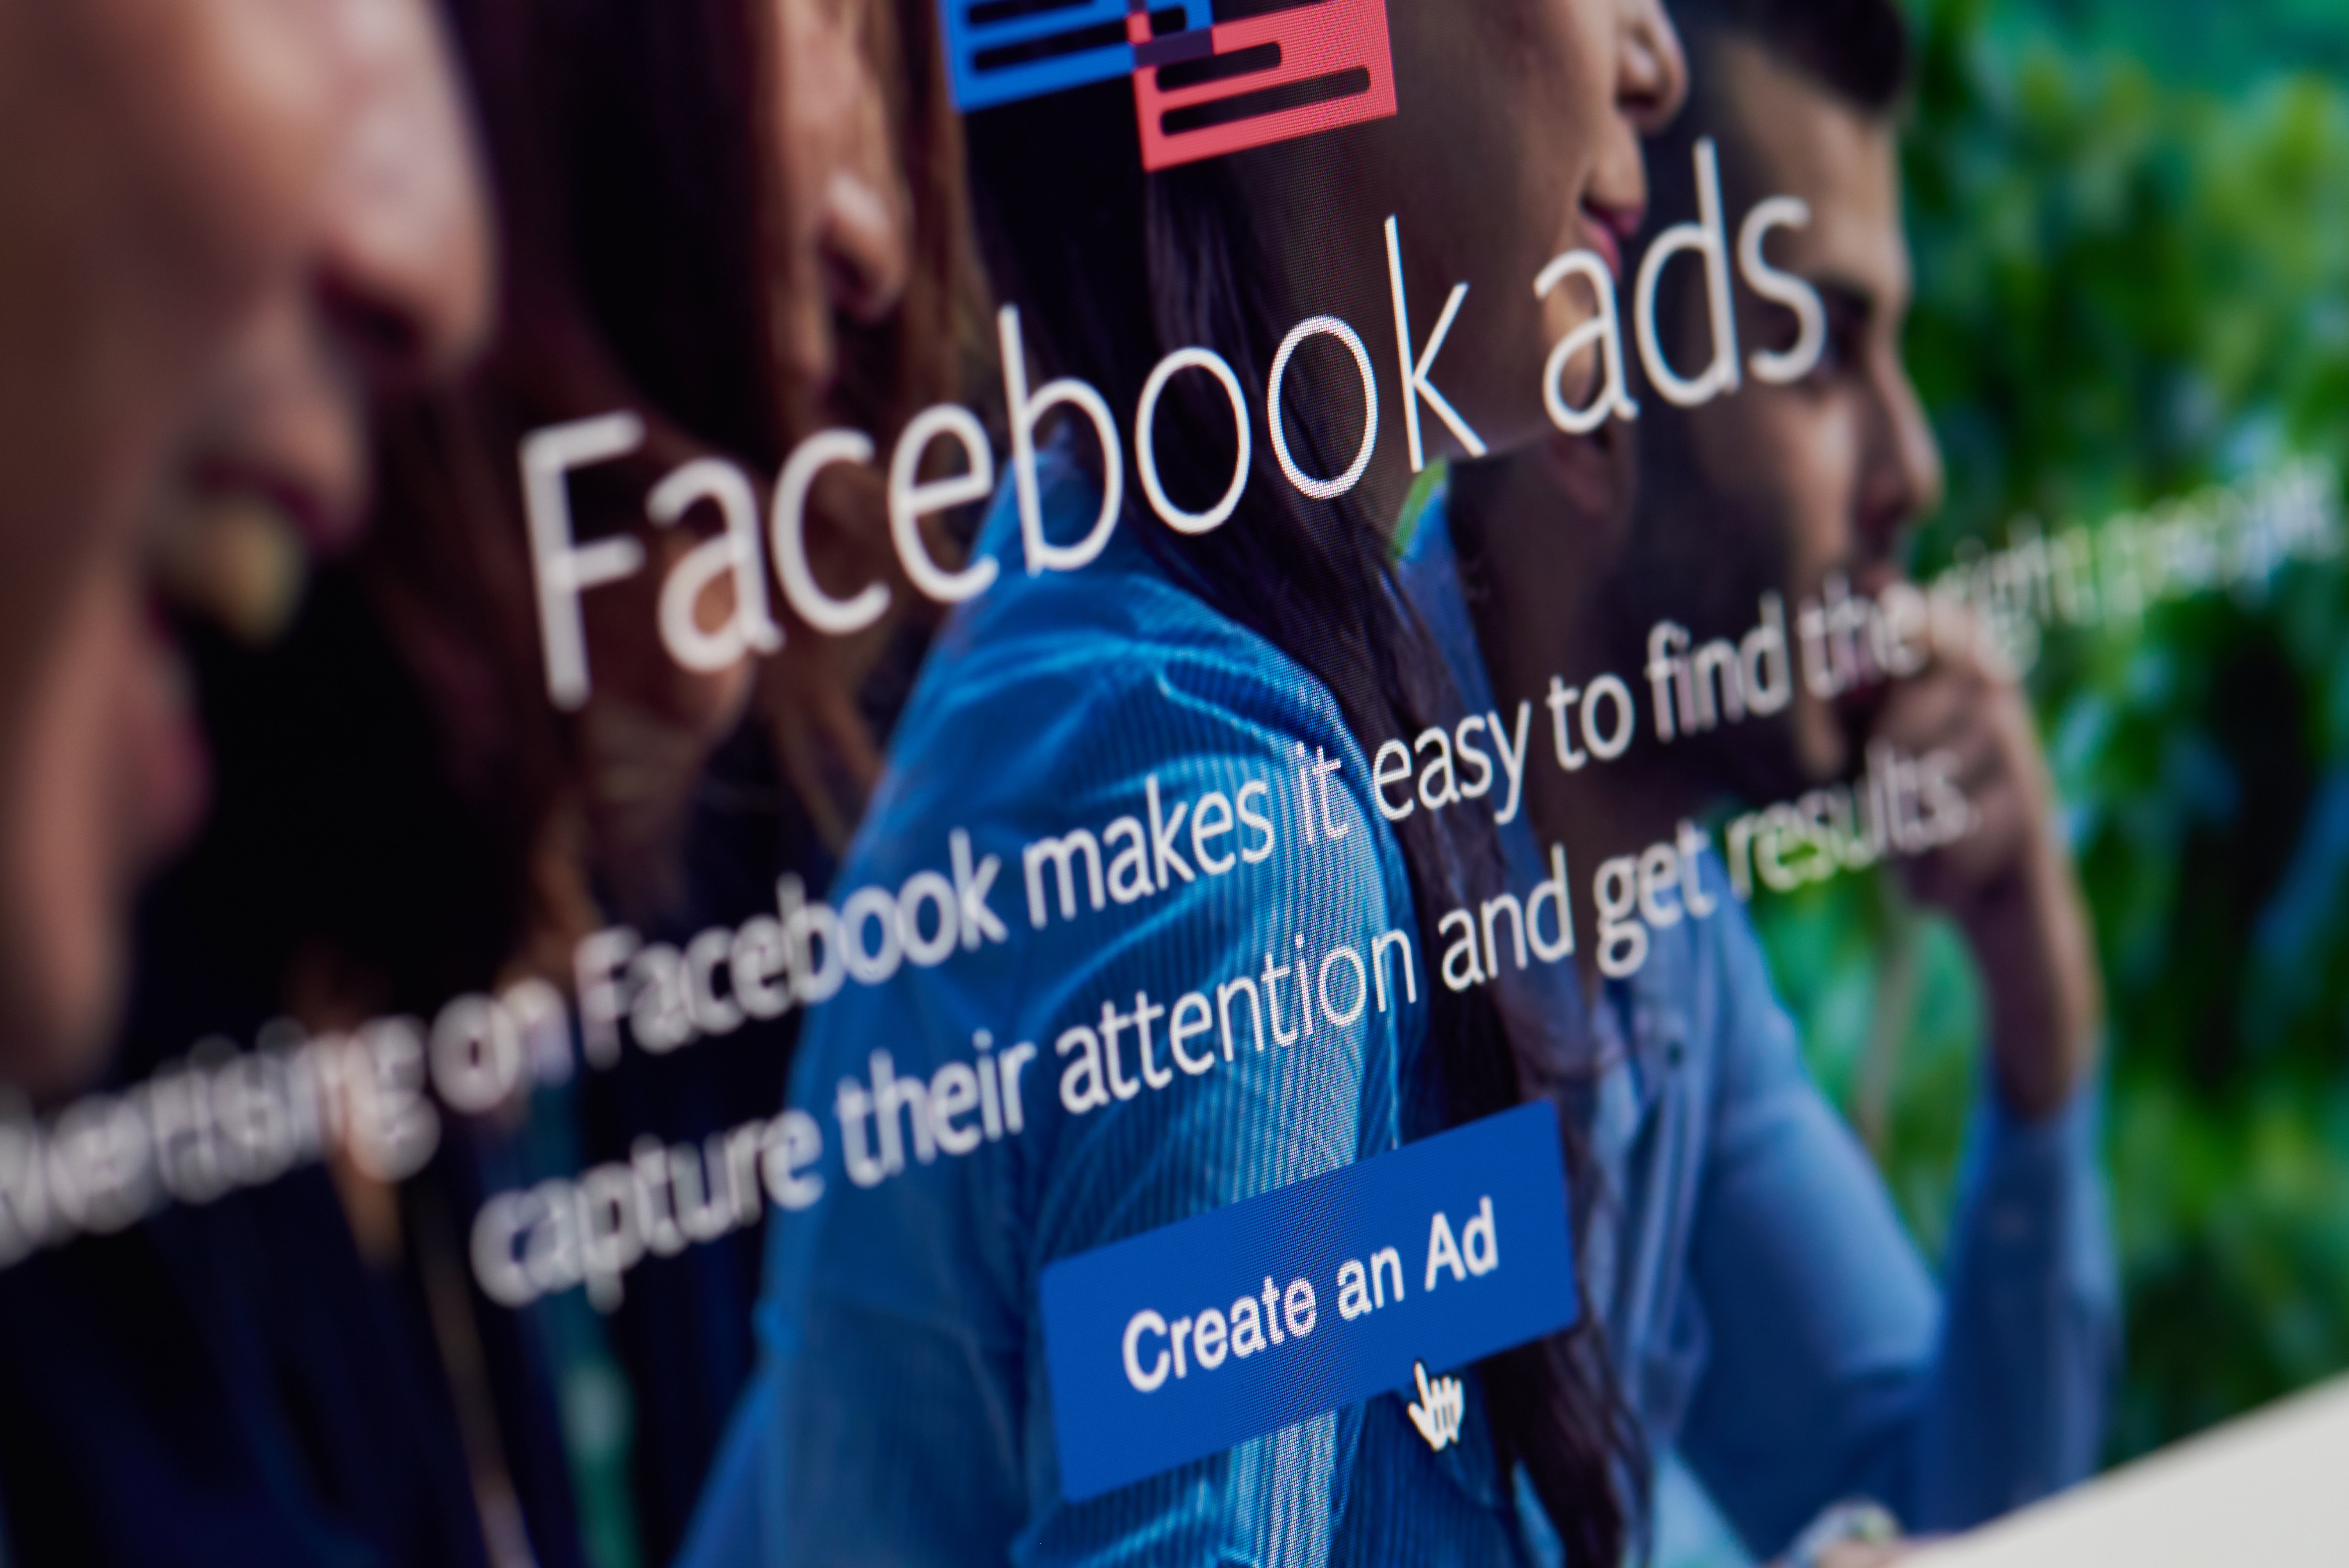 Facebook Advertising, Credit Unions and Credit Opportunity Ads